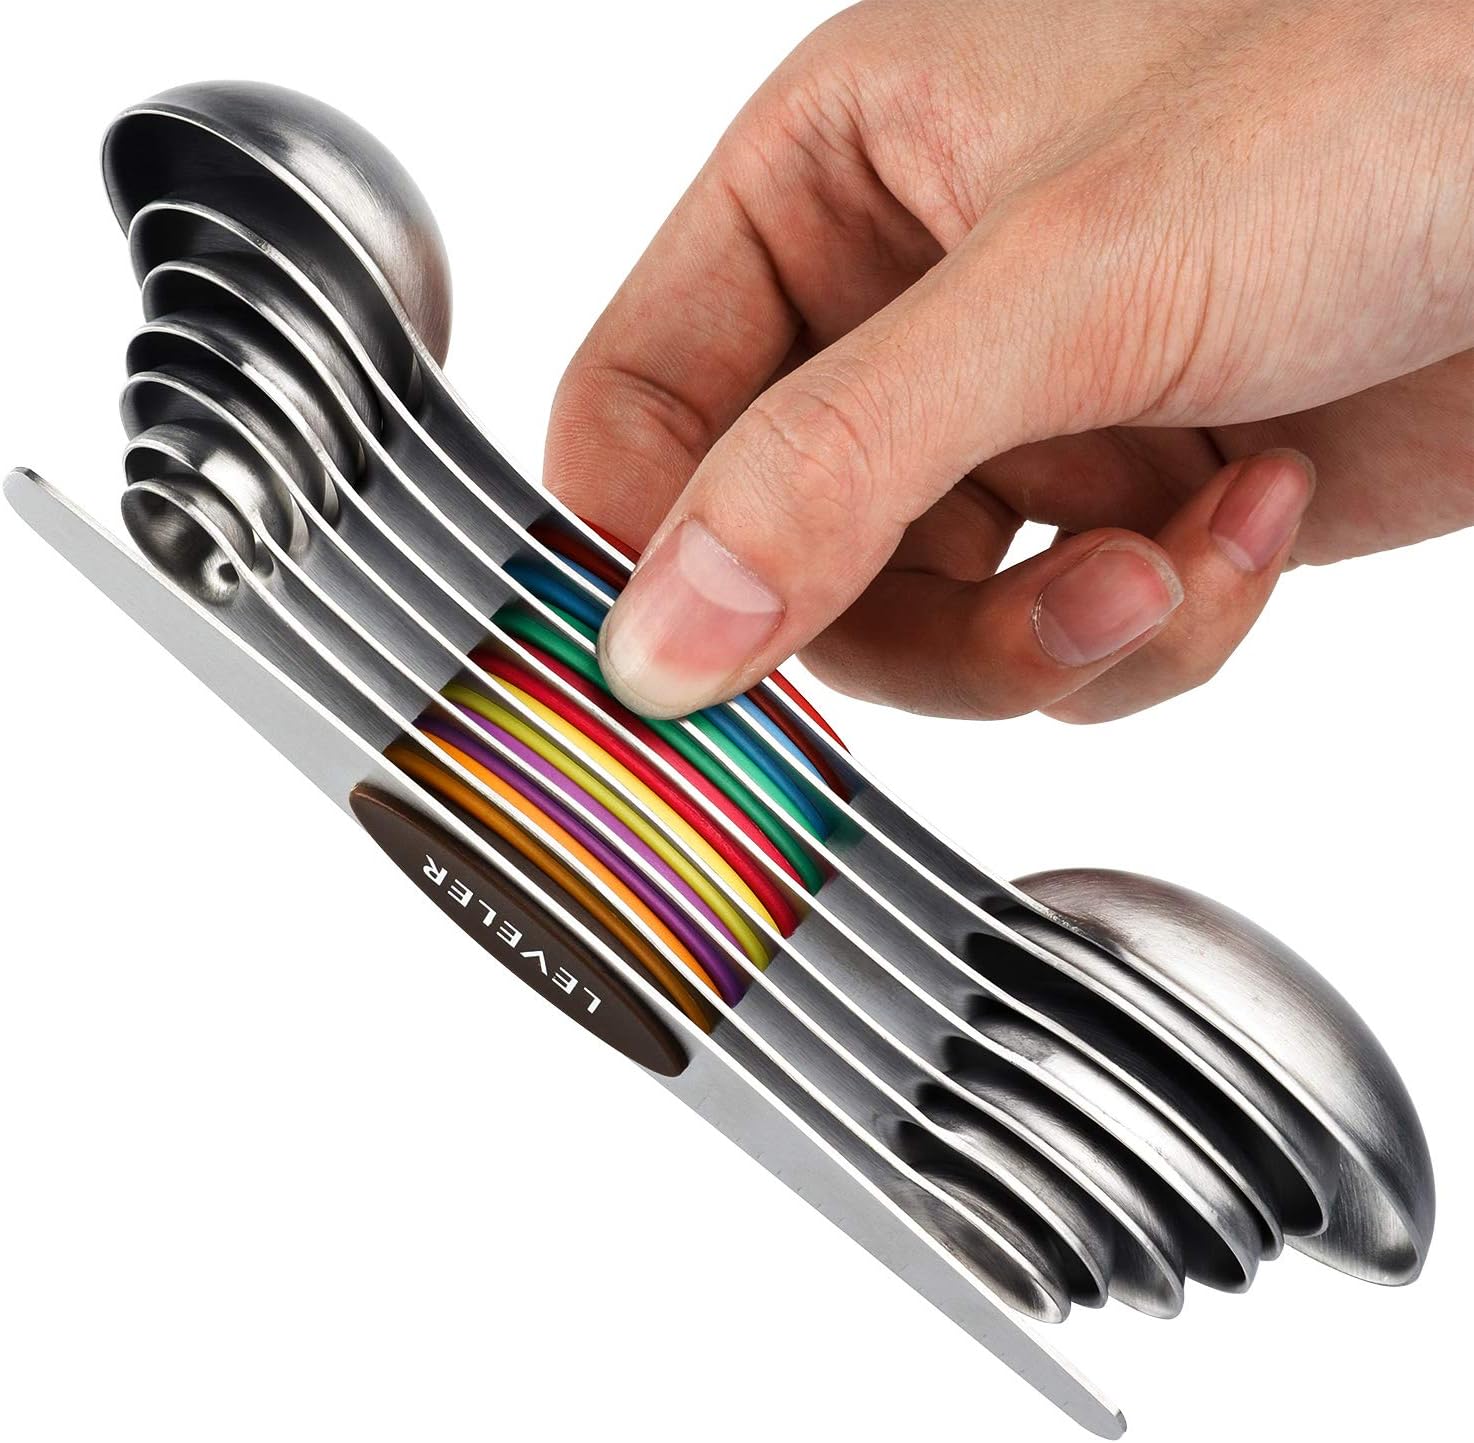 Magnetic Measuring Spoons Set of 8 Stainless Steel Dual Sided Stackable Measuring Spoons Nesting Teaspoons Tablespoons for Measuring Dry and Liquid Ingredients